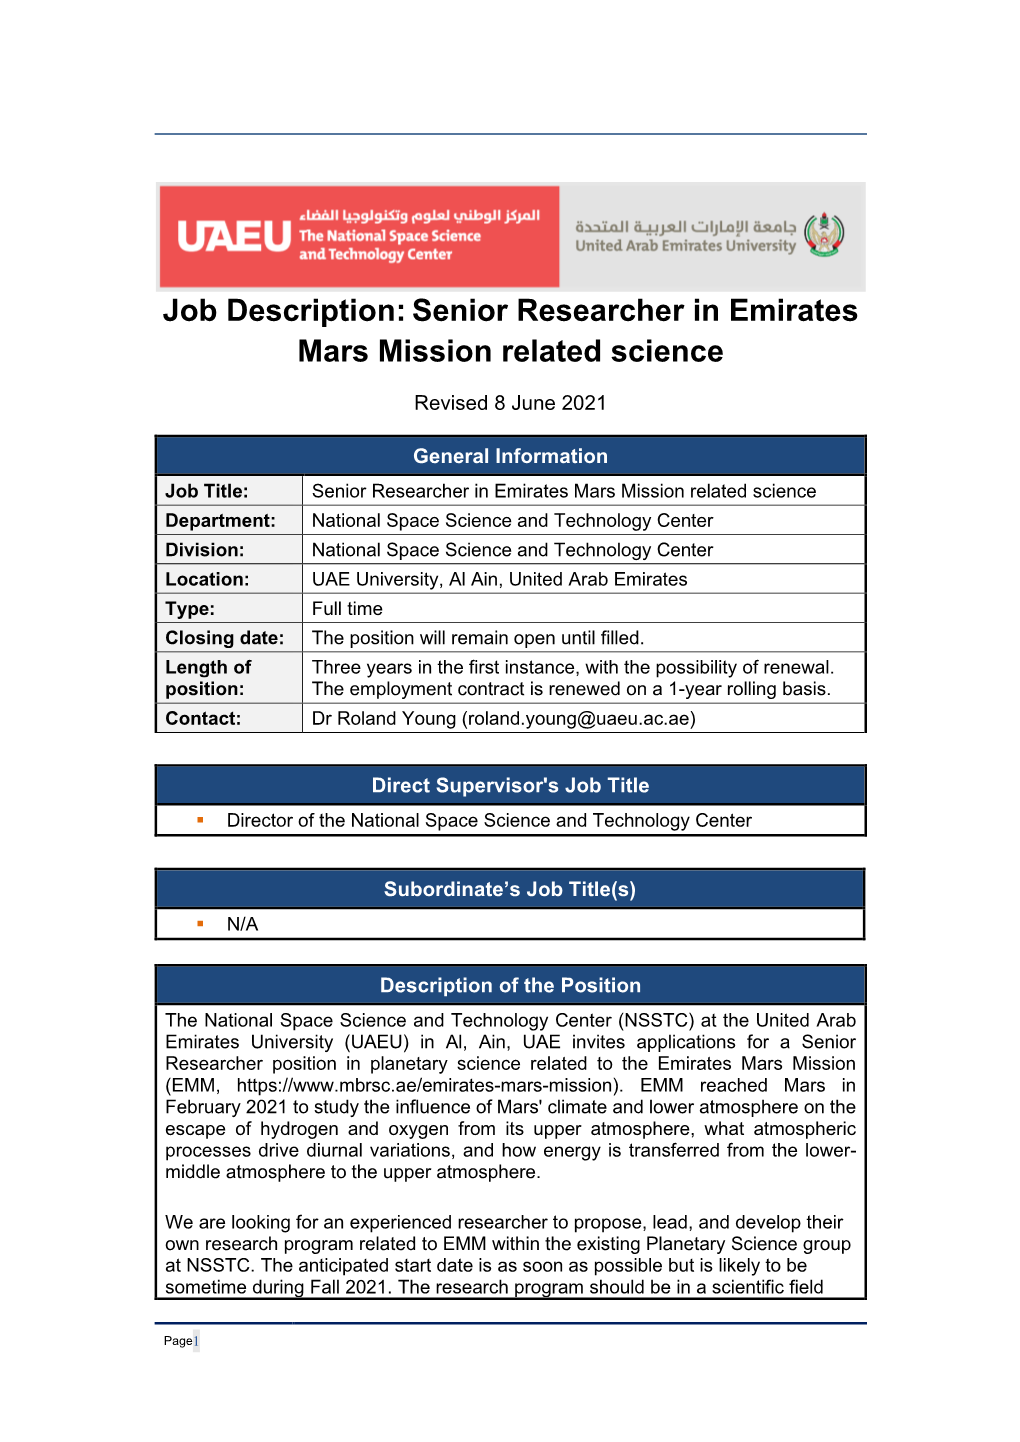 Senior Researcher in Emirates Mars Mission Related Science